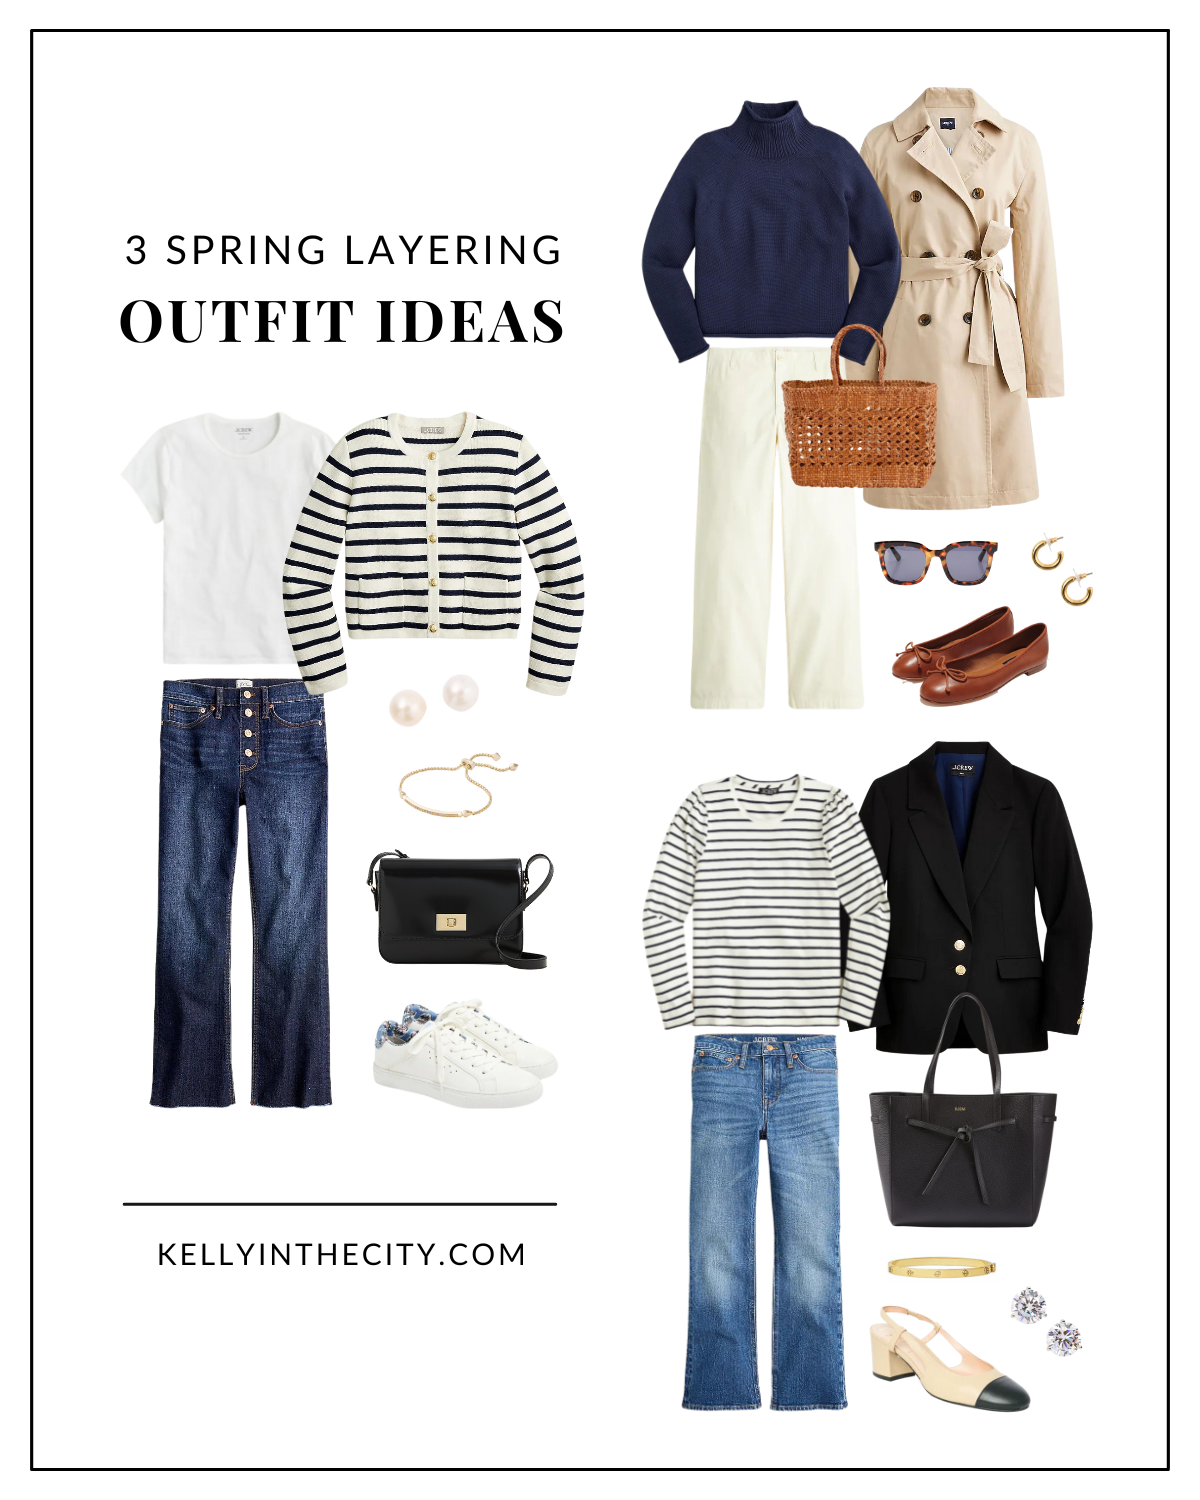 3 Spring Layering Outfit Ideas - Kelly in the City | Lifestyle Blog